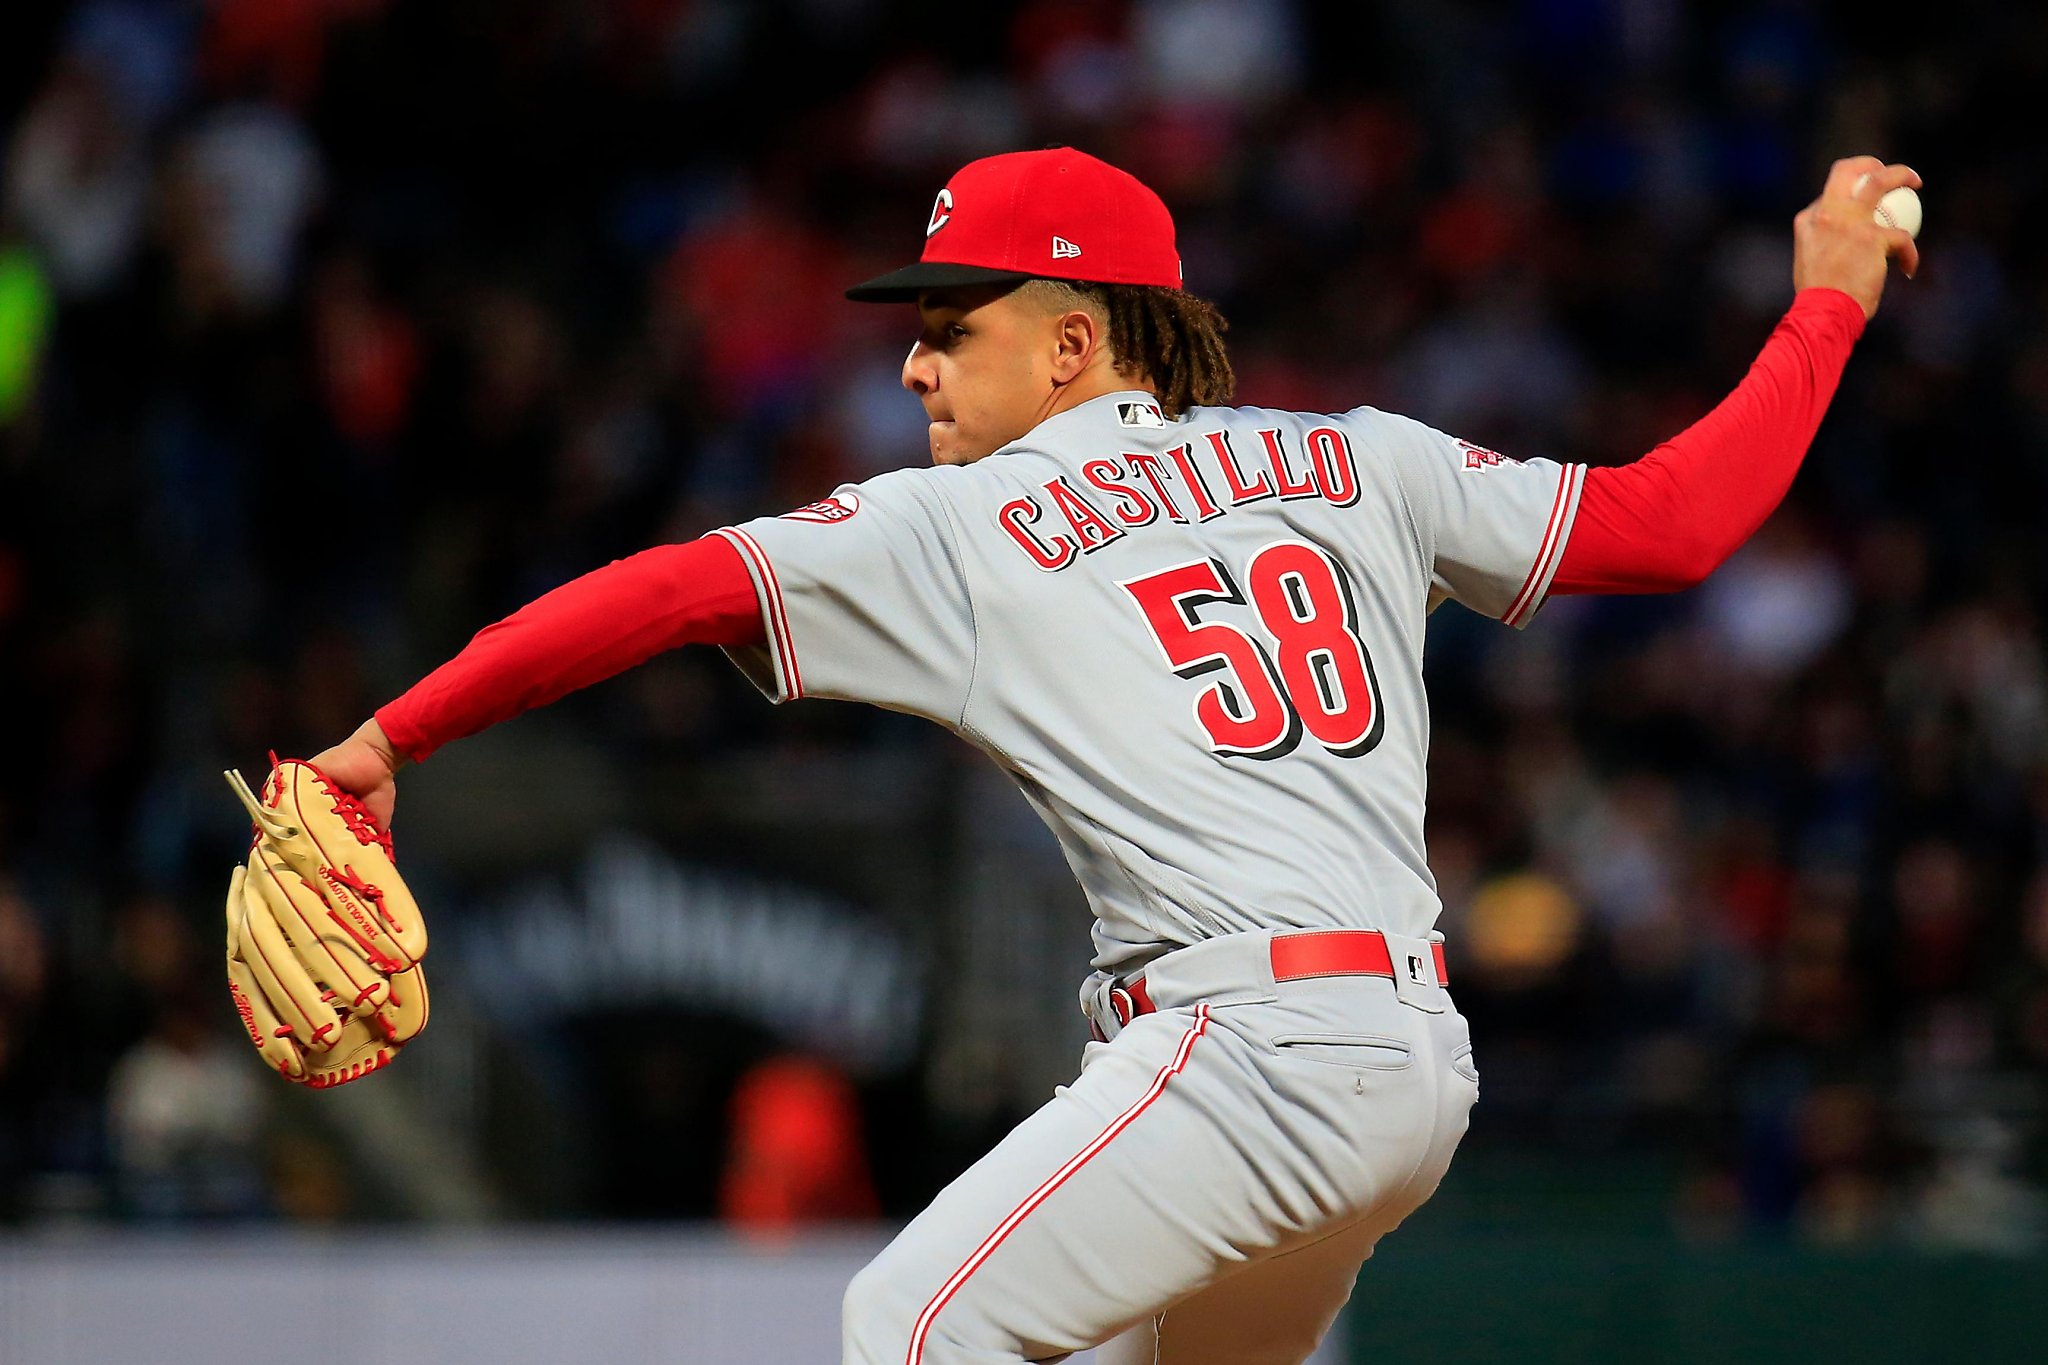 Pitching Ace Luis Castillo to Represent the Cincinnati Reds at the